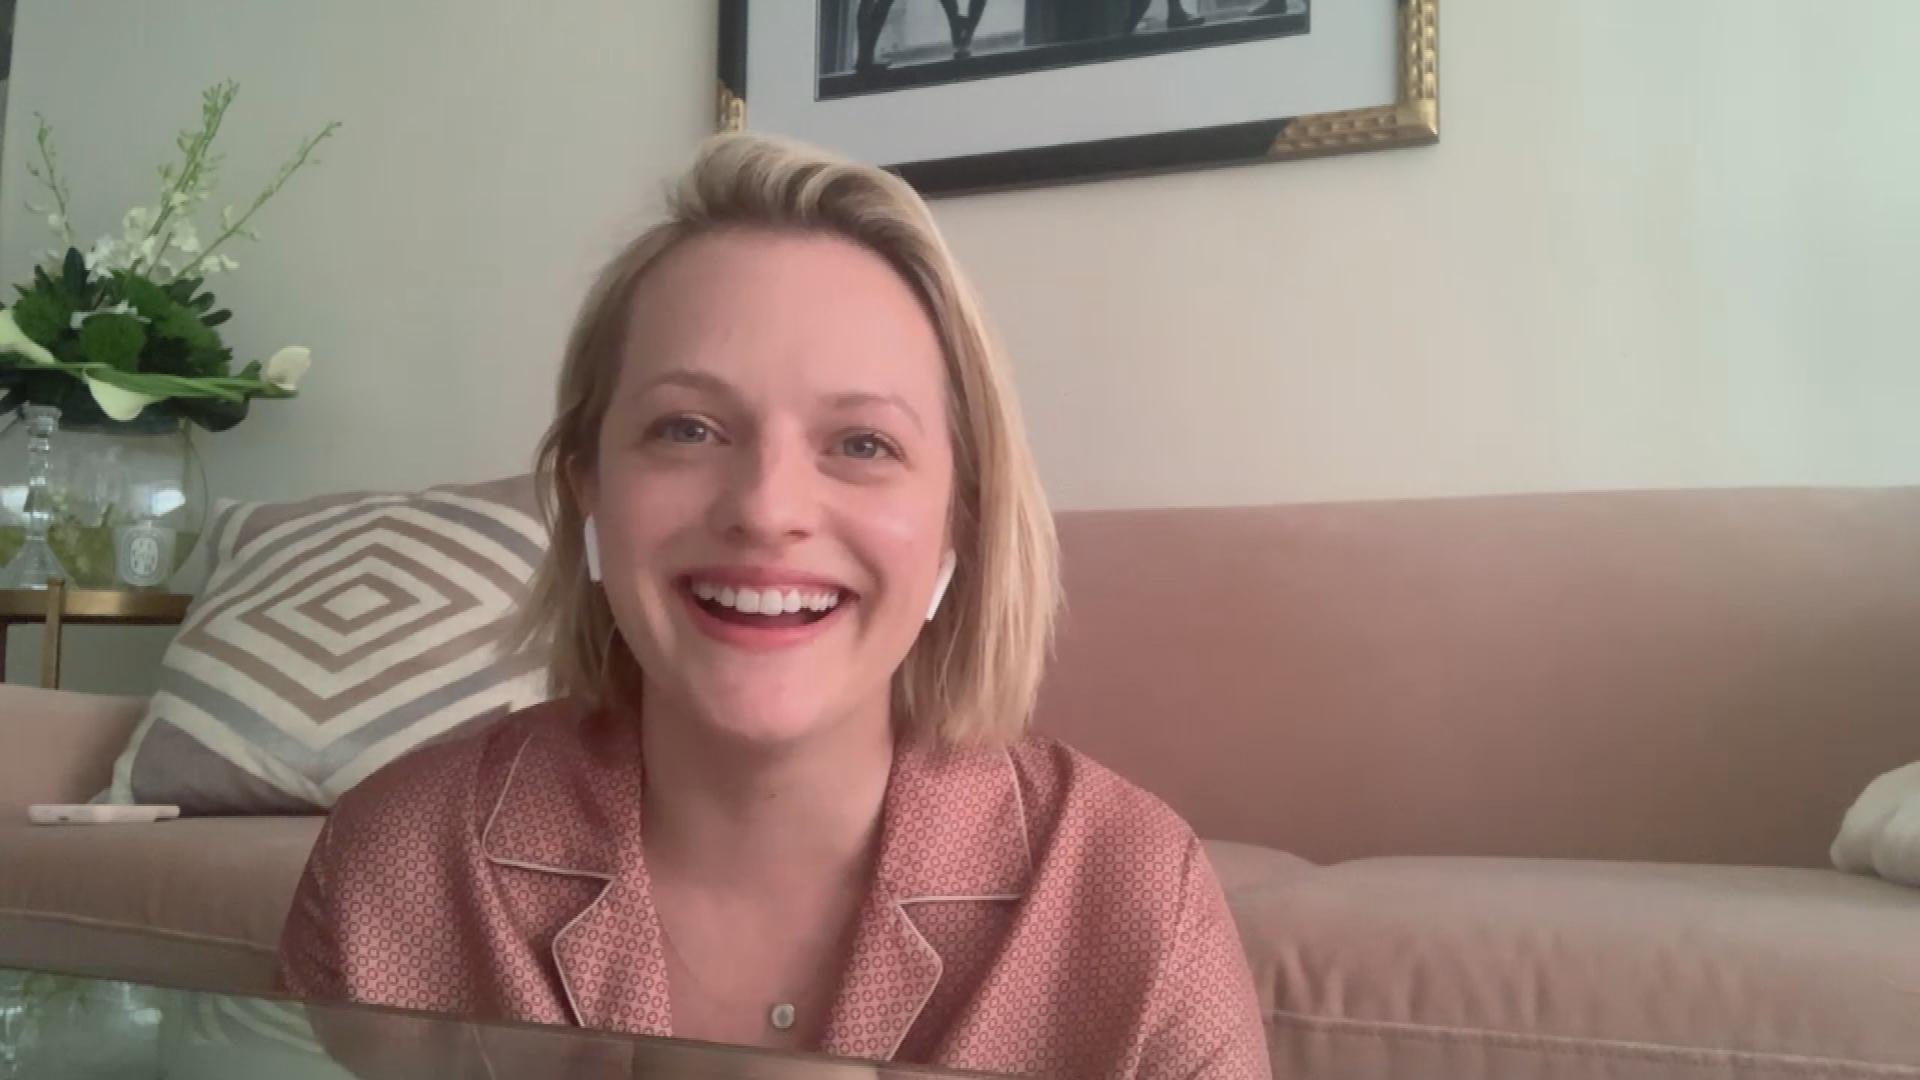 Friday Night In With the Morgans Episode 8 Clip: The Emmy Story, Jeffrey Dean Morgan and Elisabeth Moss share a behind-the-scenes story of when Jeffrey presented Elisabeth with her 2017 Emmy win; plus, Elisabeth Moss talks about her new movie 'Shirley.'